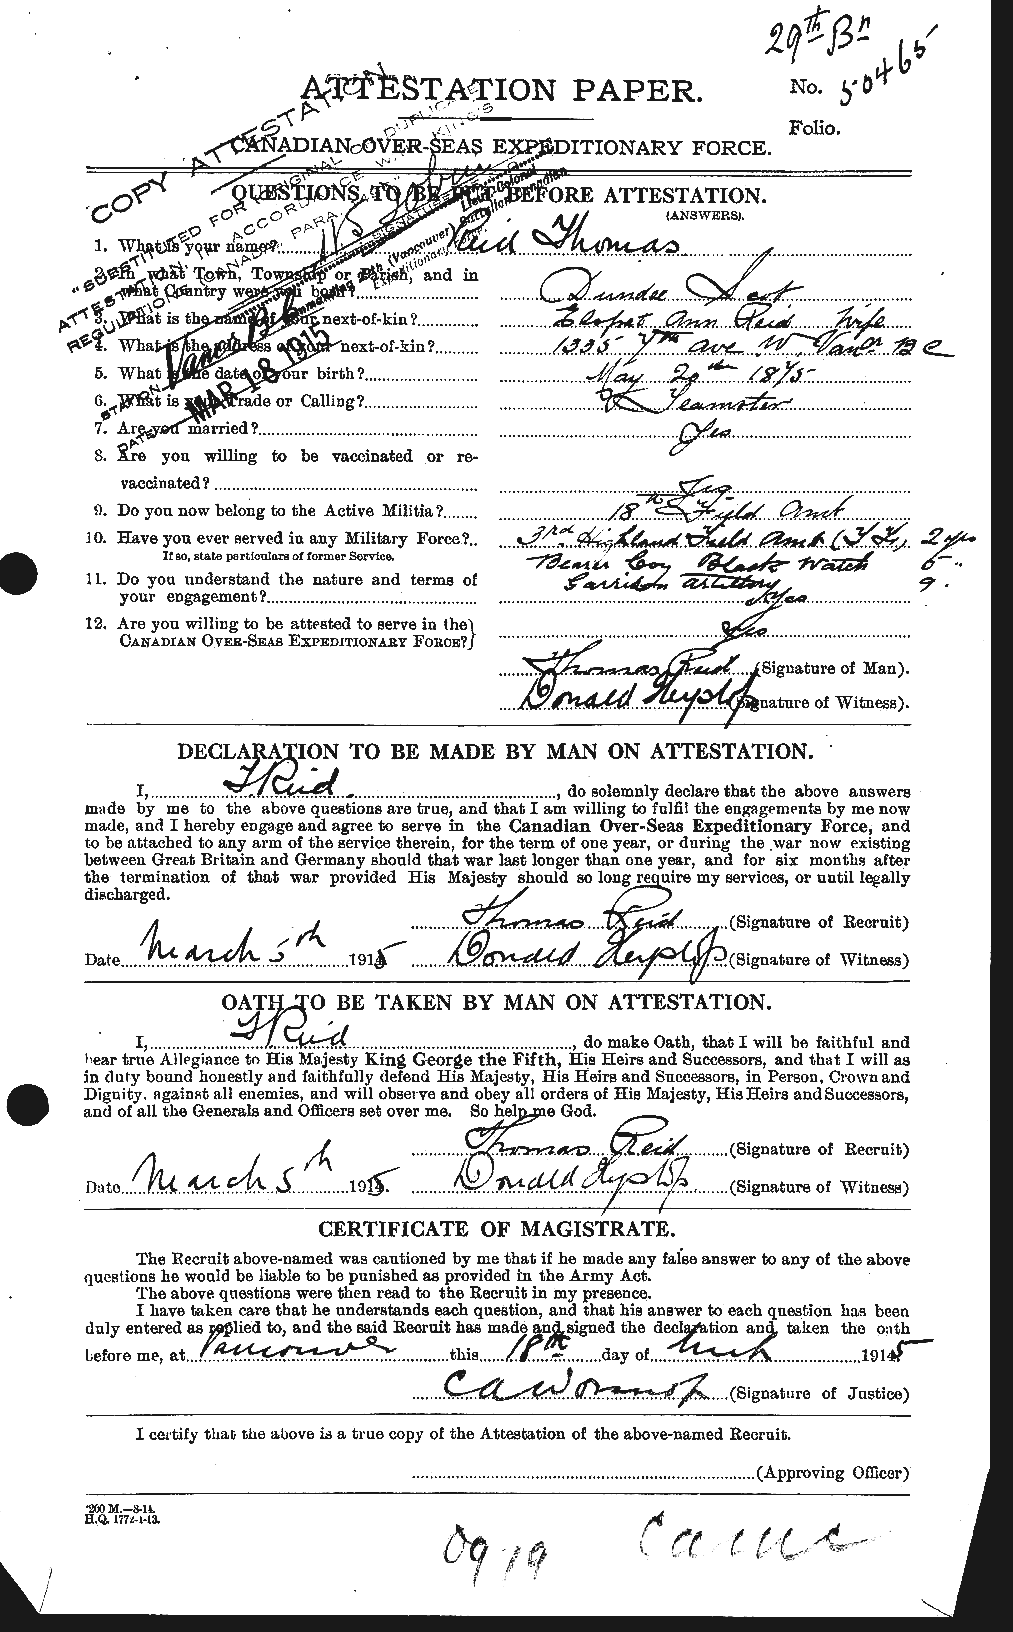 Personnel Records of the First World War - CEF 601980a